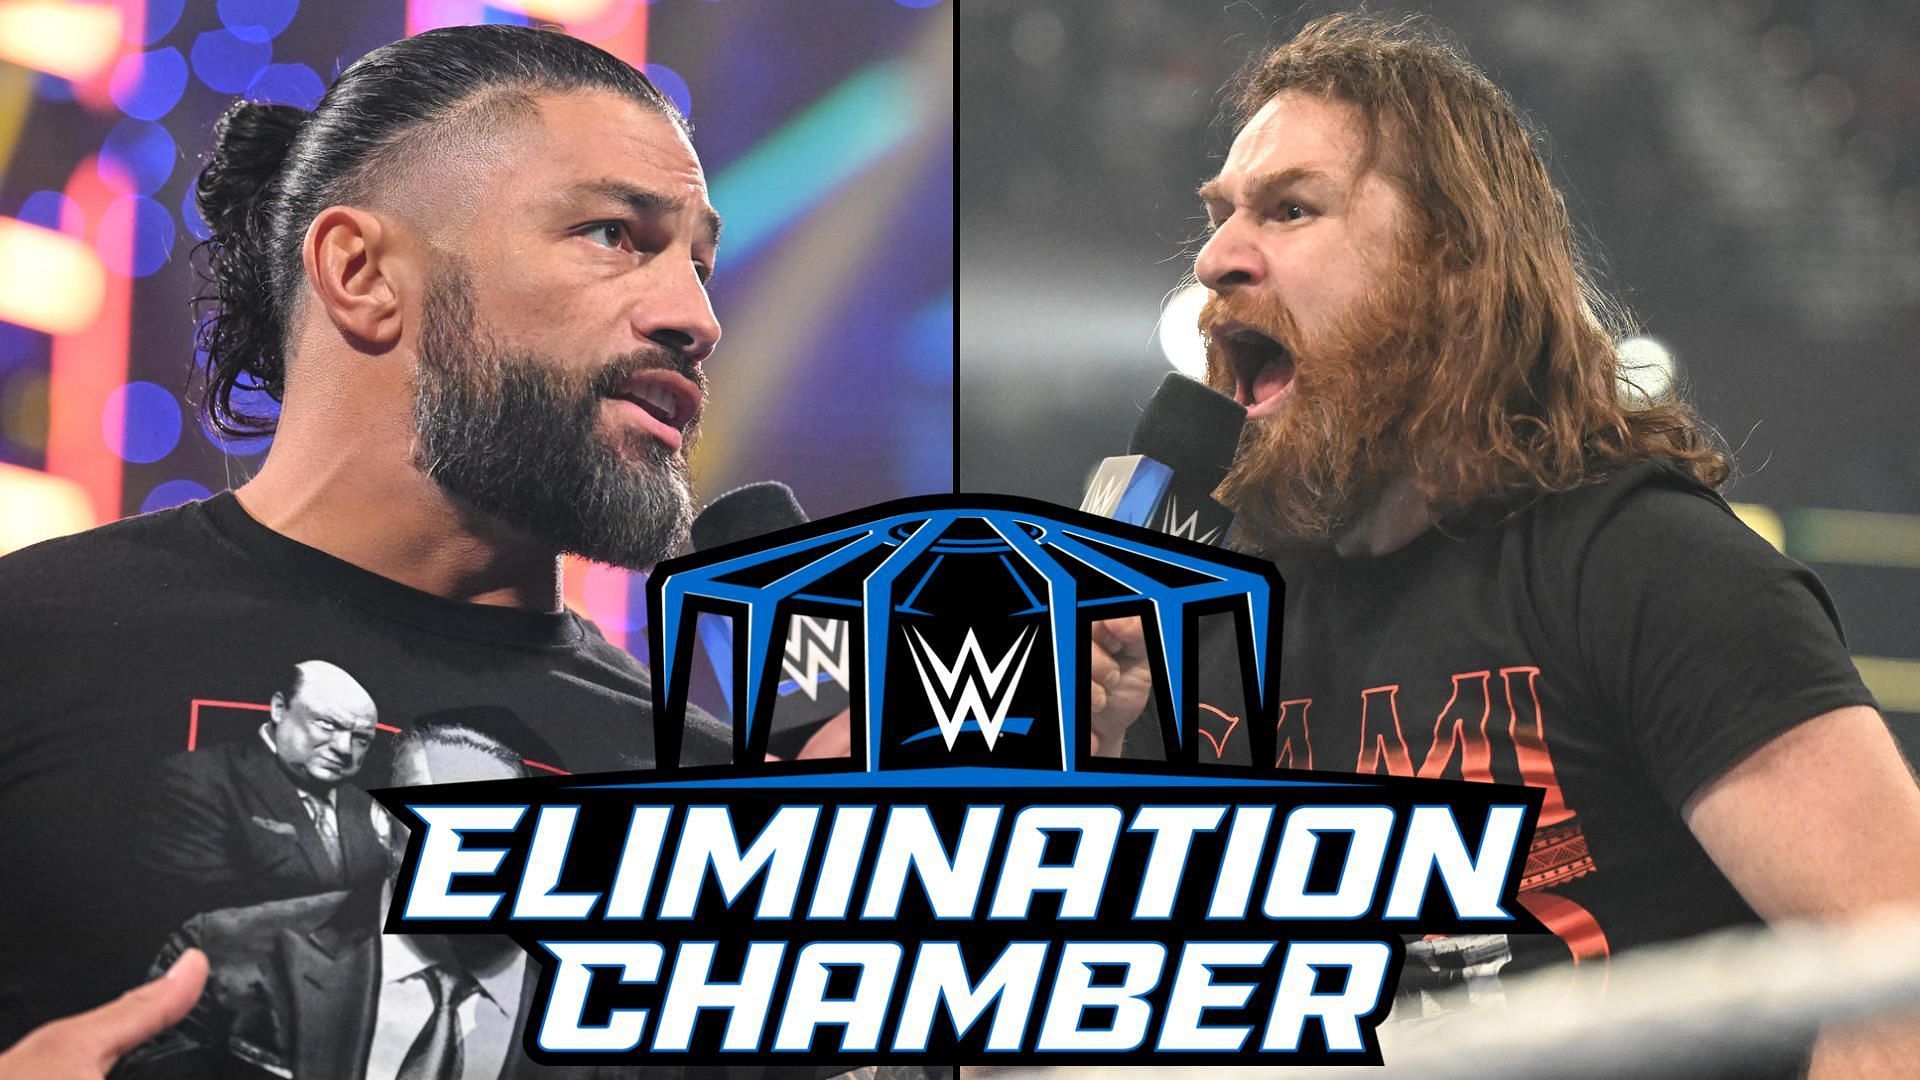 Roman Reigns versus Sami Zayn is the main event of WWE Elimination Chamber 2023